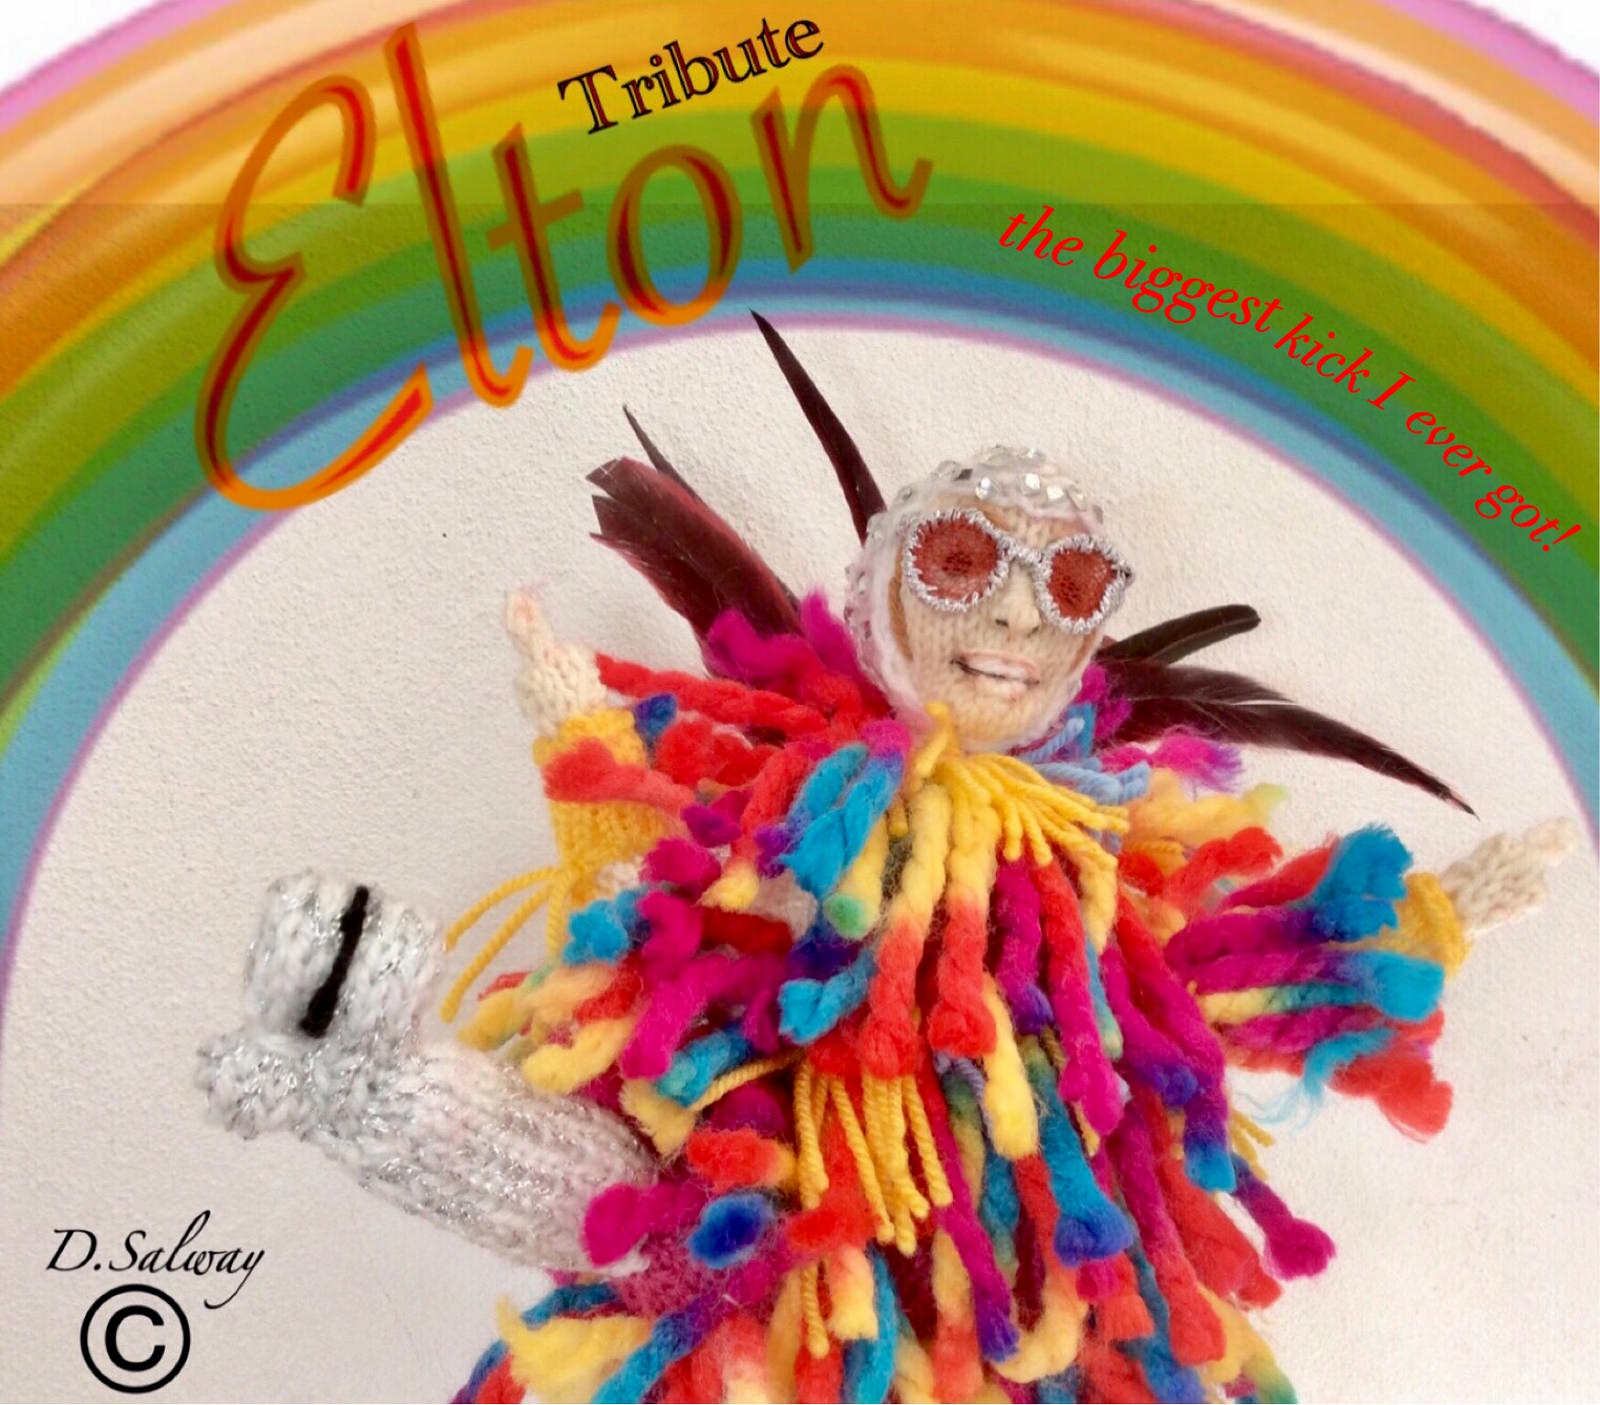 Denise Salway's Knitted Tribute To Elton John is Rainbow Fantastic!